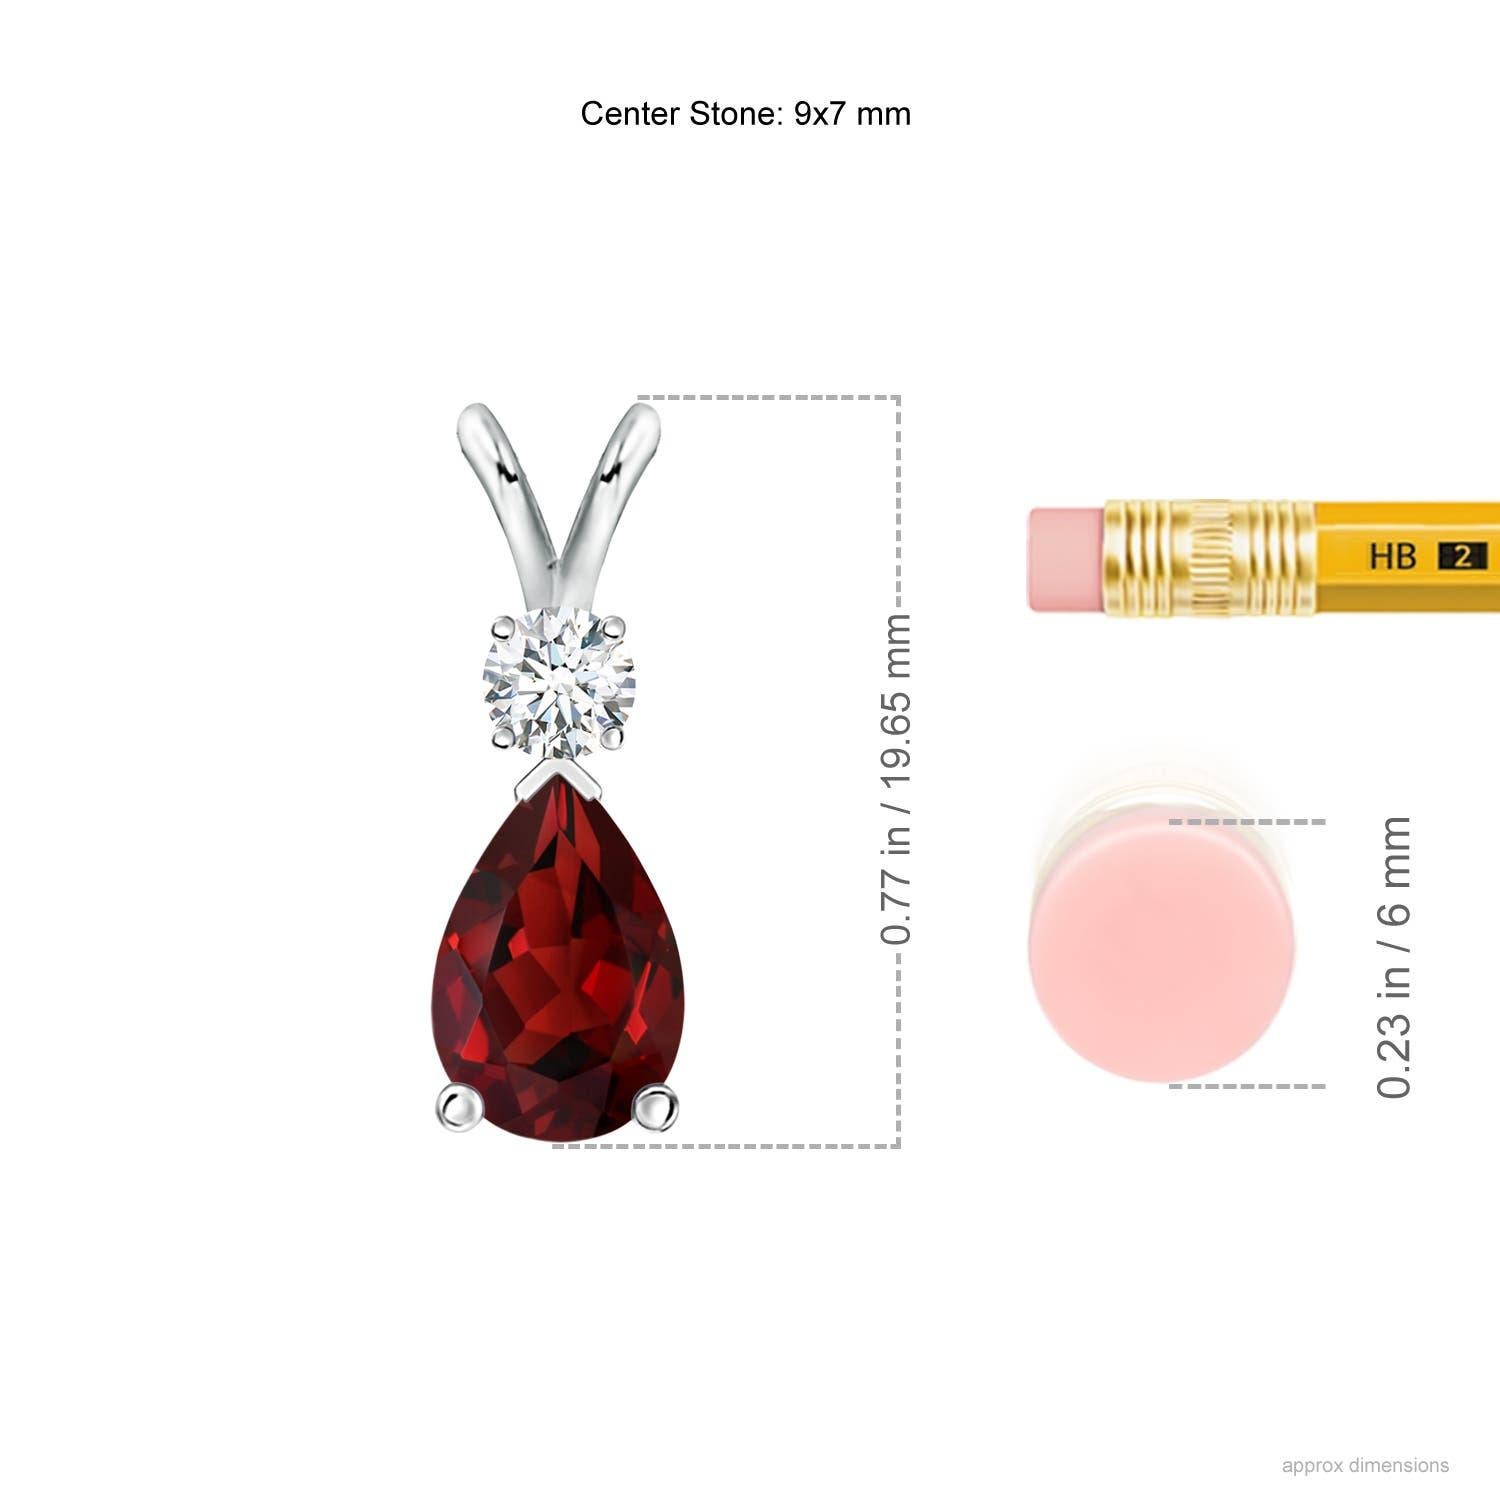 A pear-shaped intense red garnet is secured in a prong setting and embellished with a diamond accent on the top. Simple yet stunning, this teardrop garnet pendant with V bale is sculpted in platinum.